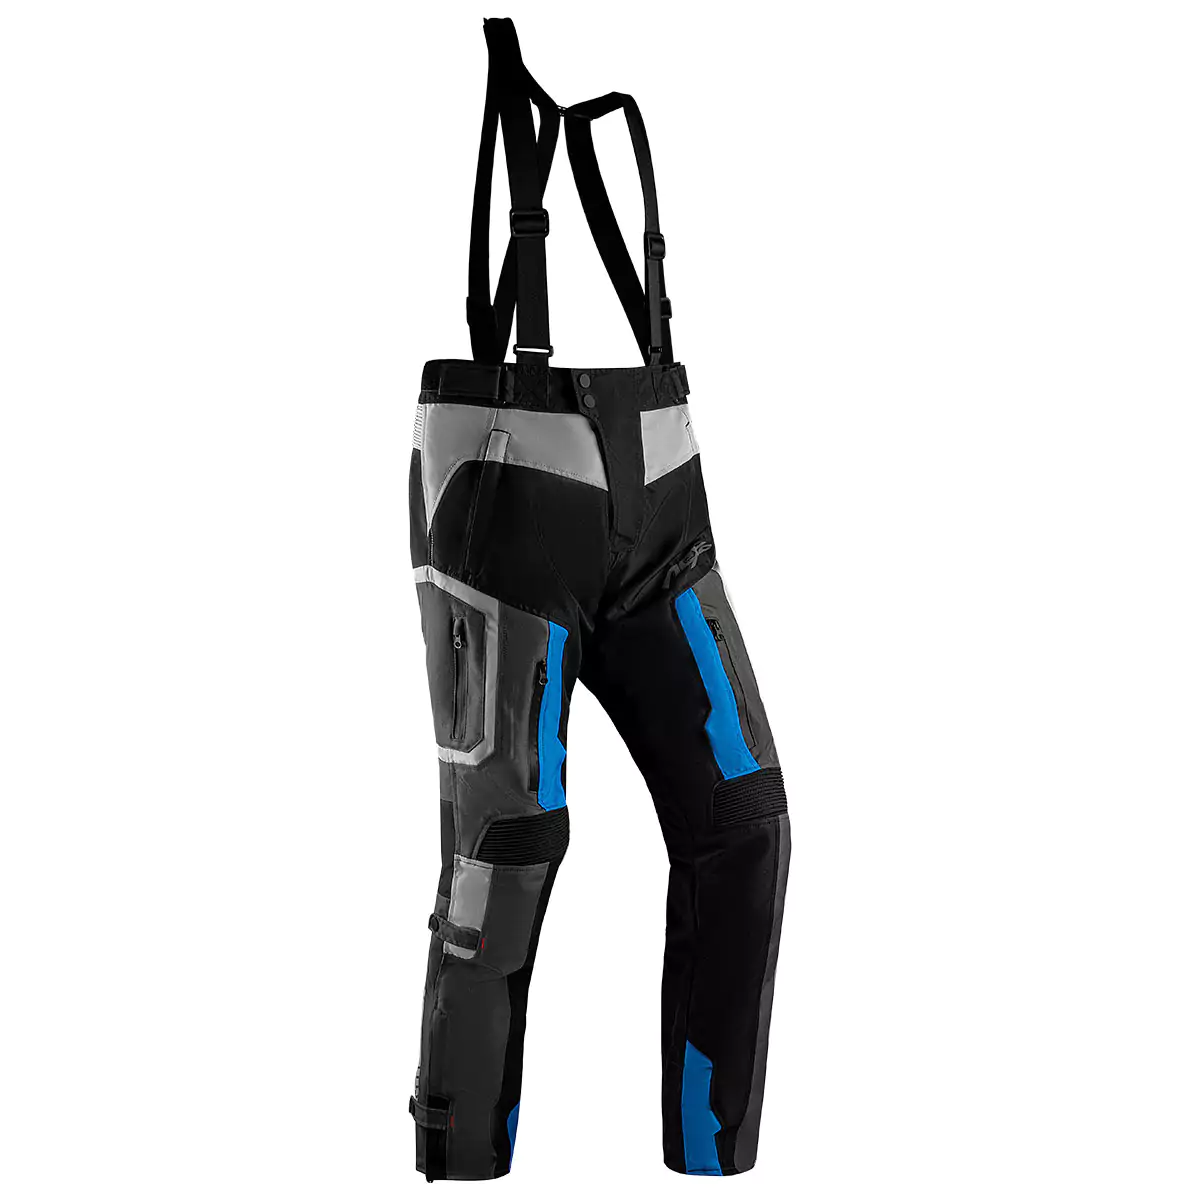 Black, grey and blue color motorcycle textile pants with protective padding and adjustable straps.